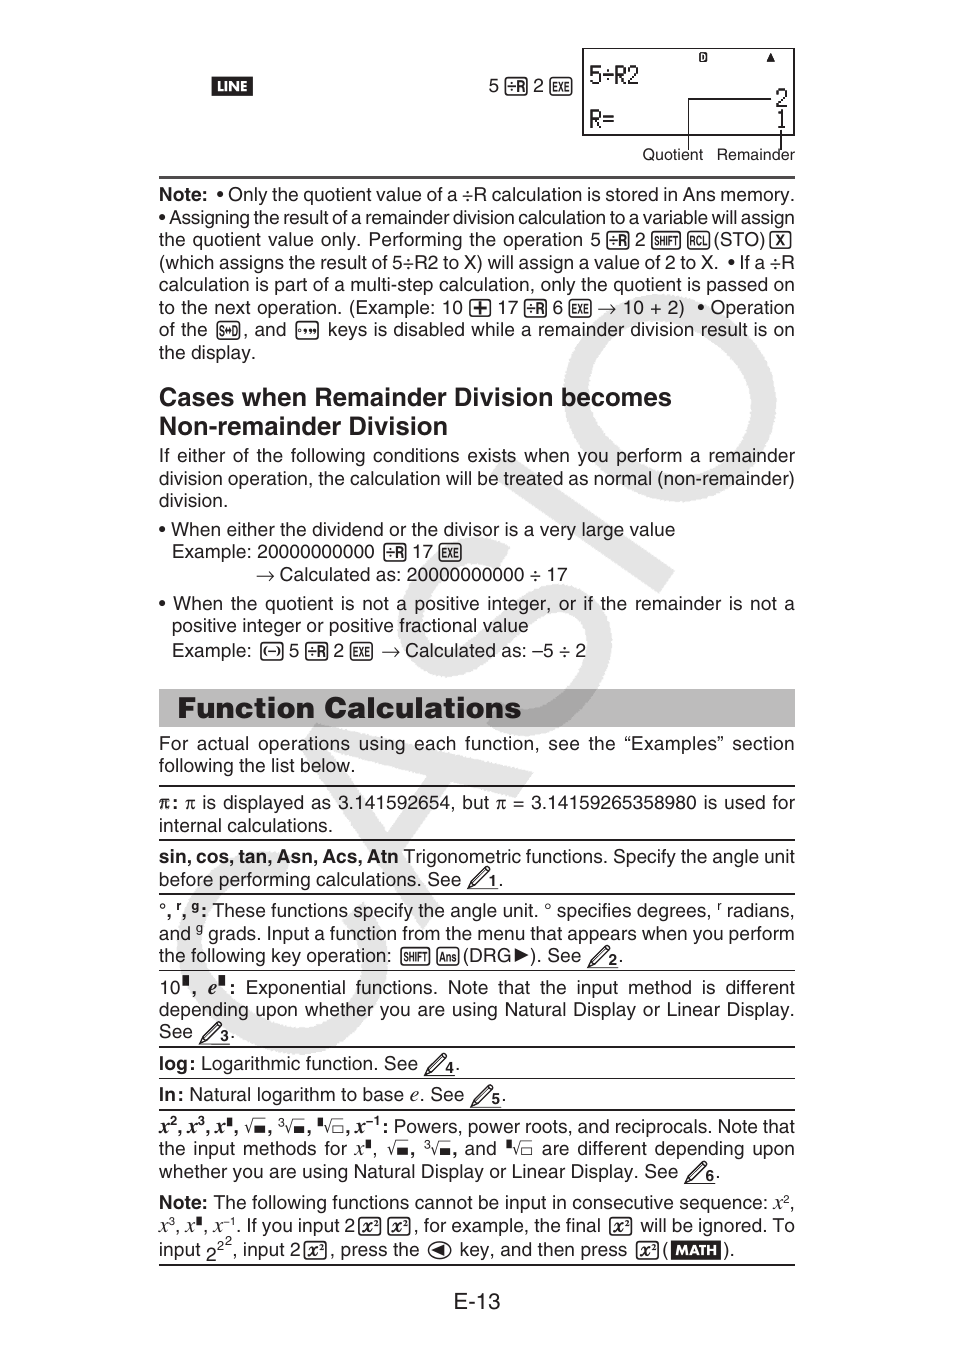 Function calculations, E-13 | Casio fx-92B Collège 2D+ User Manual | Page  14 / 31